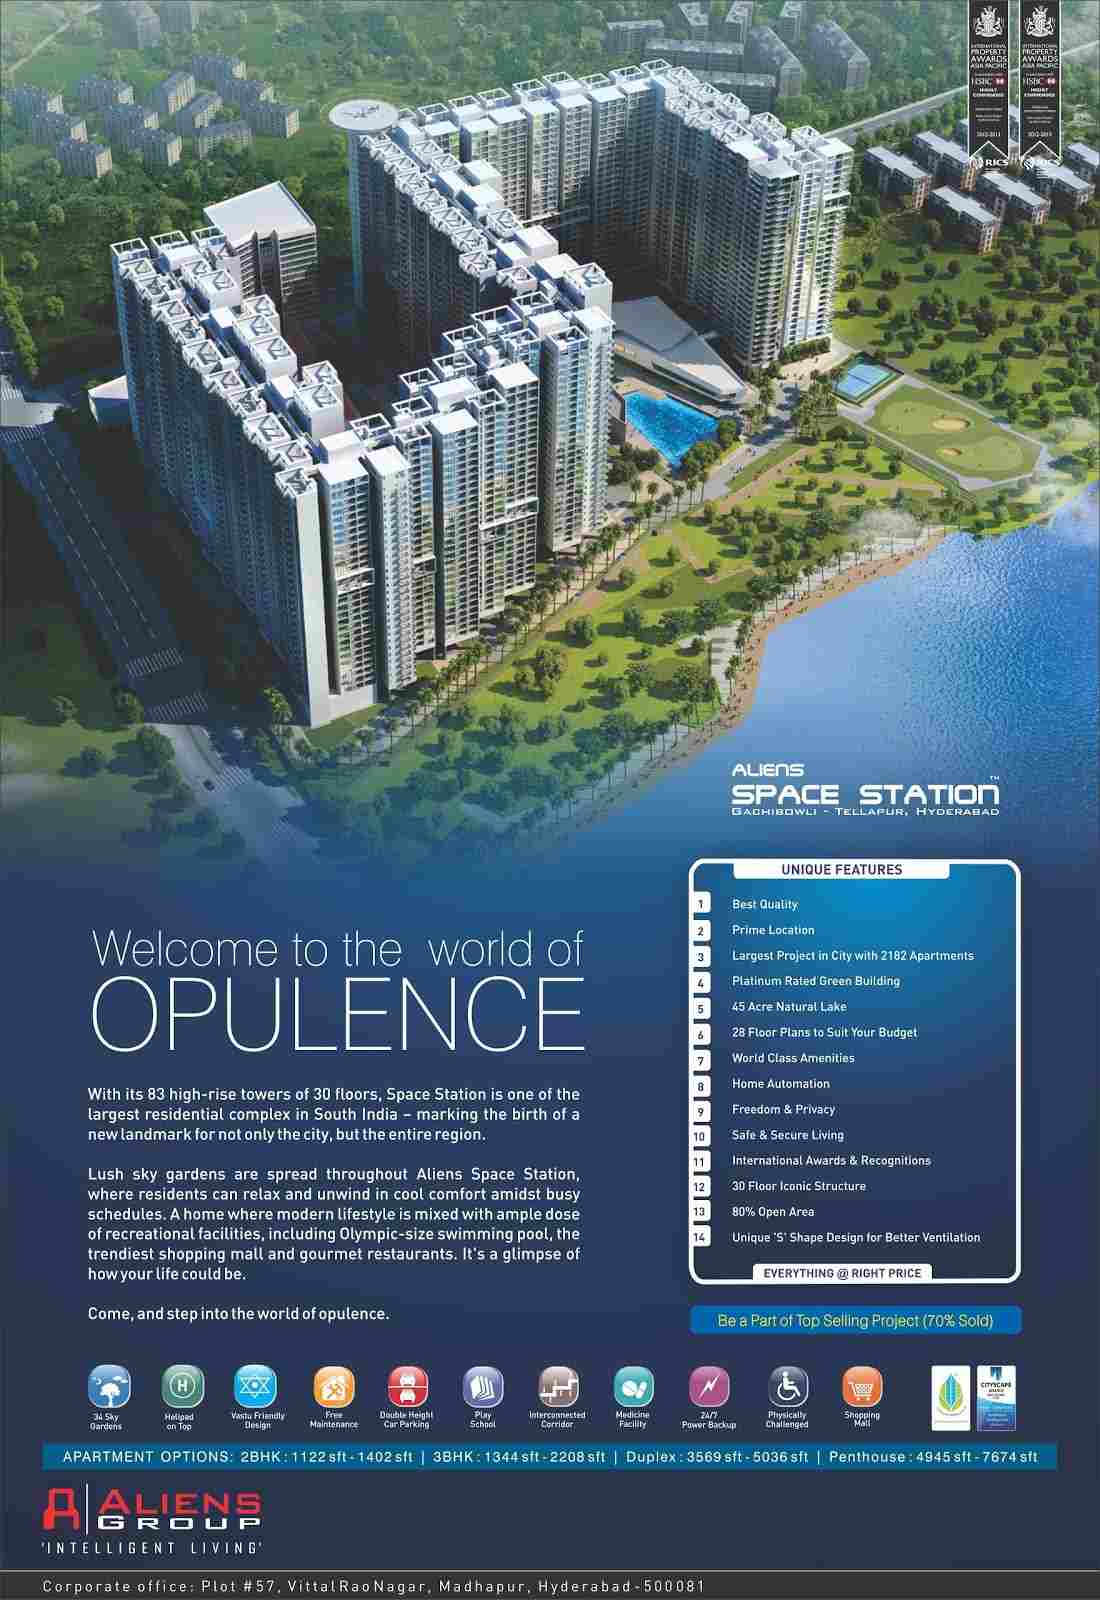 Welcome to the world of opulence at Aliens Space Station in Hyderabad Update